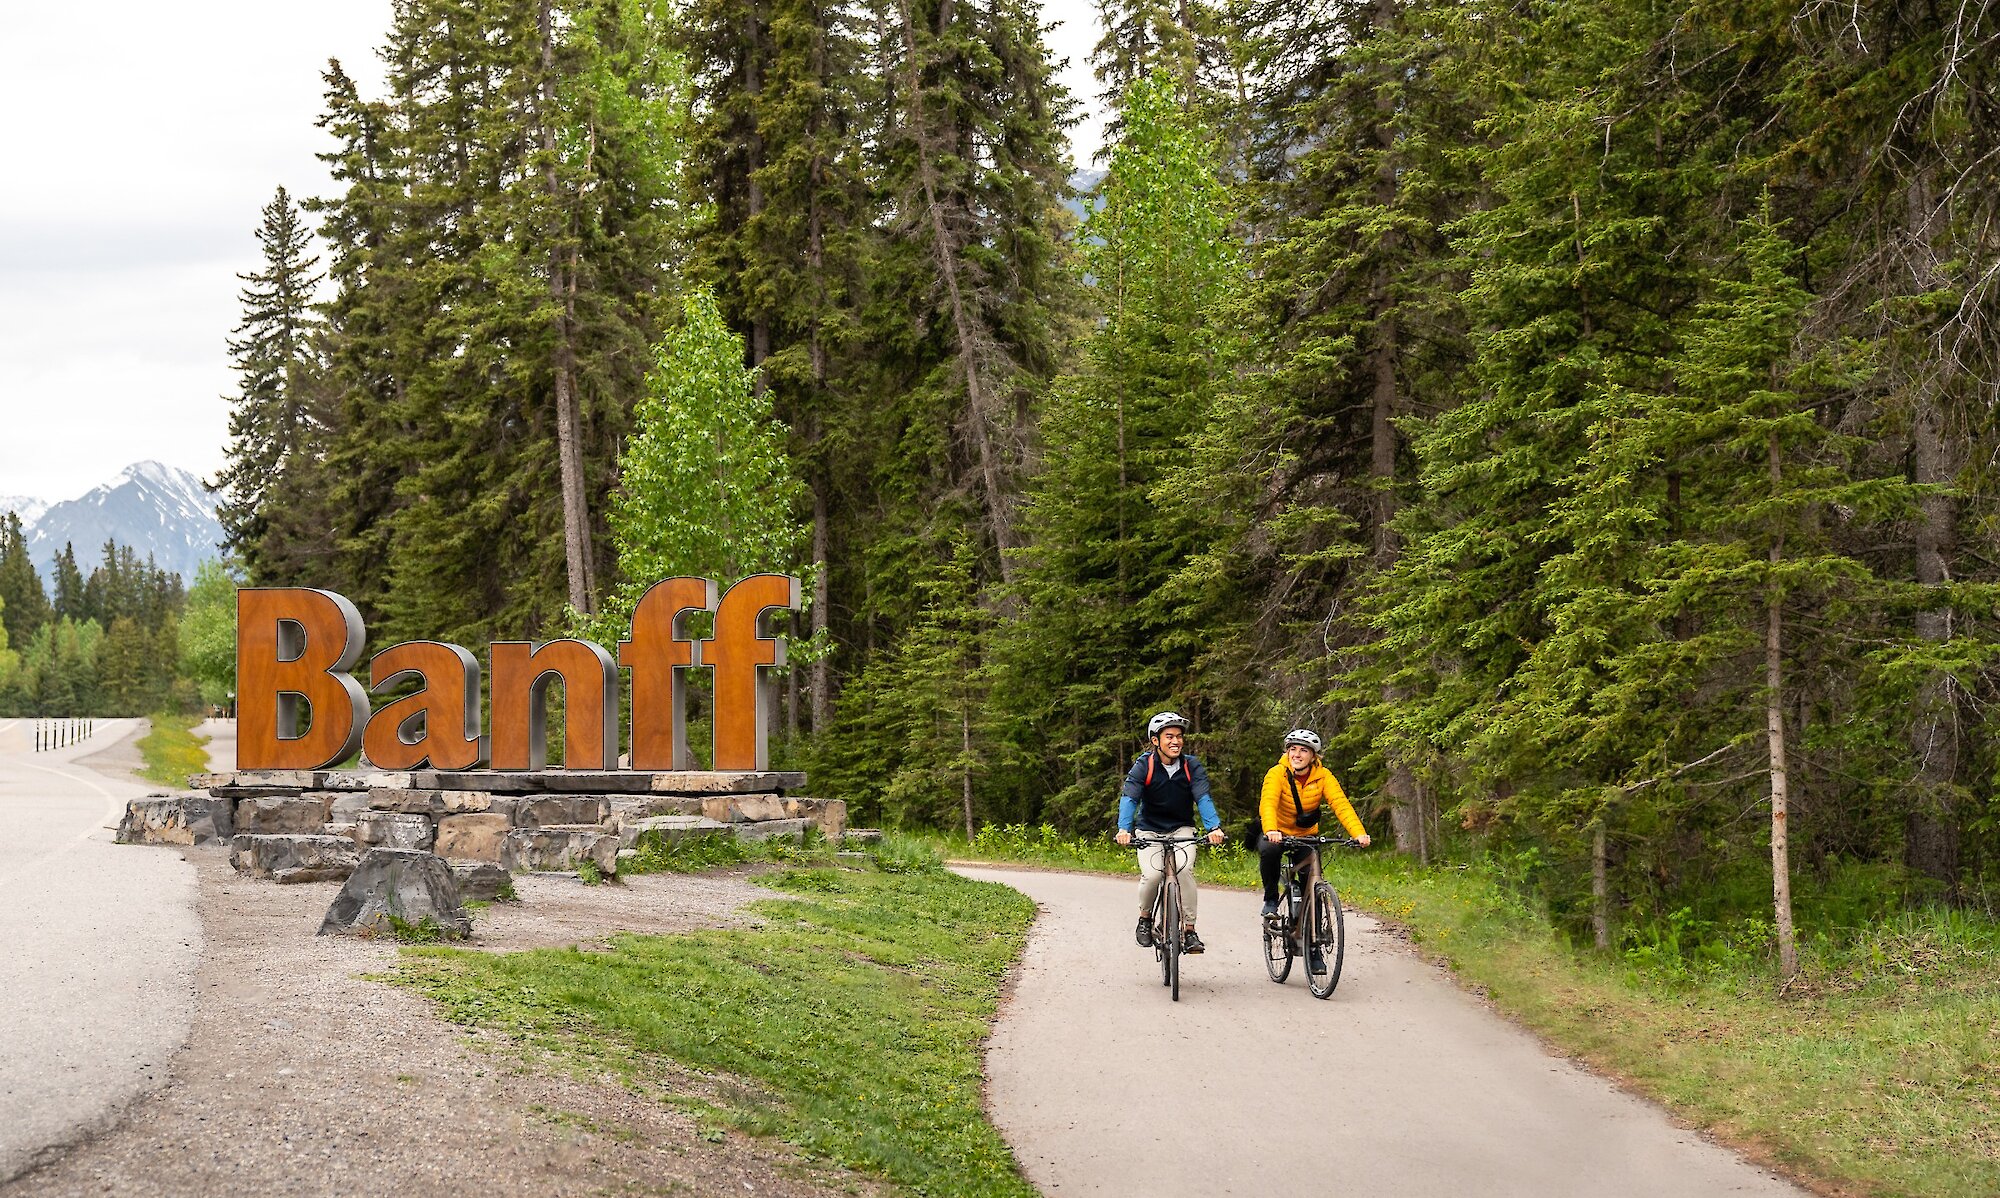 Riding the legacy trail in Banff National Park